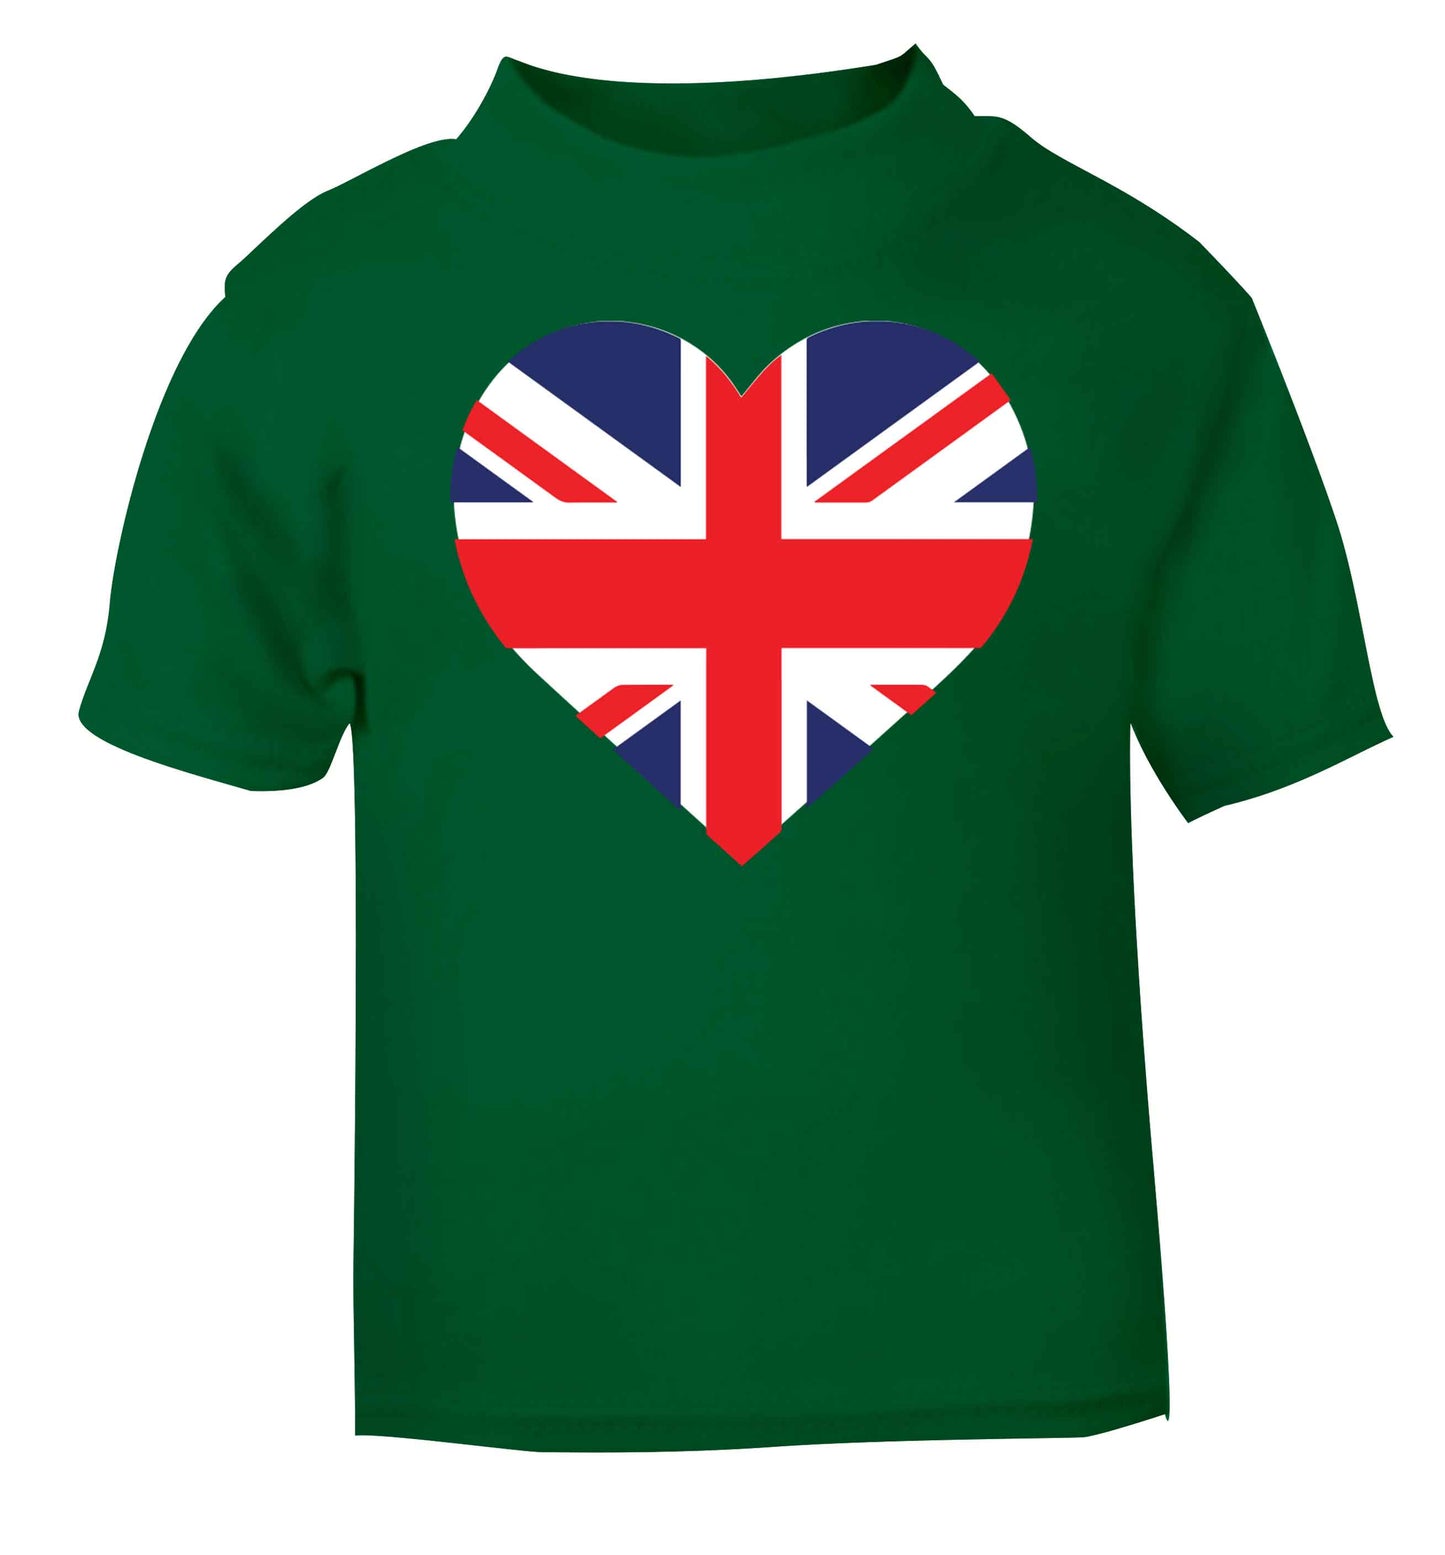 Union Jack Heart green baby toddler Tshirt 2 Years